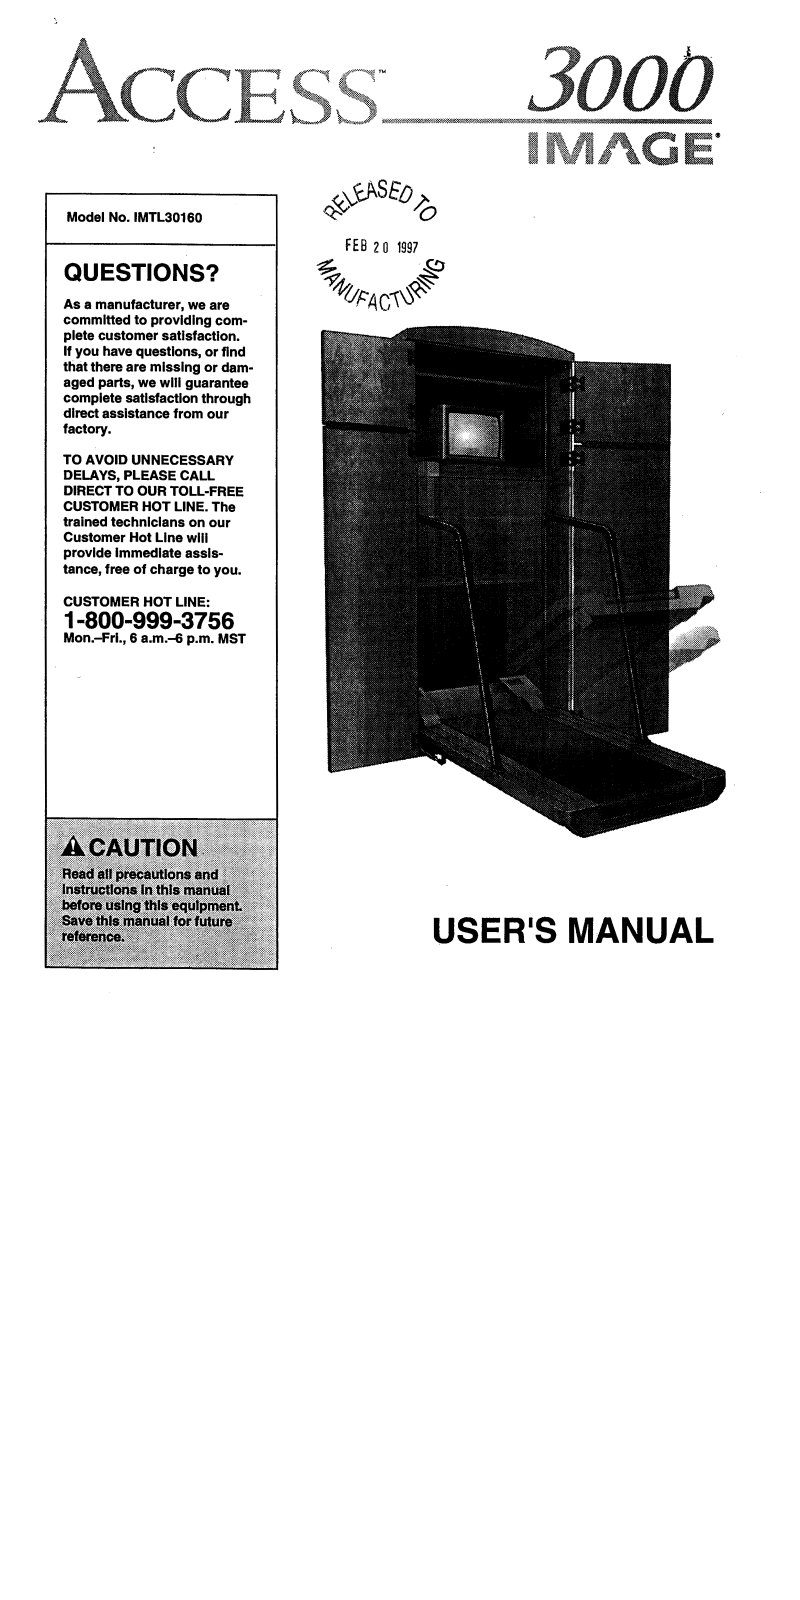 Image IMTL30160 Owner's Manual